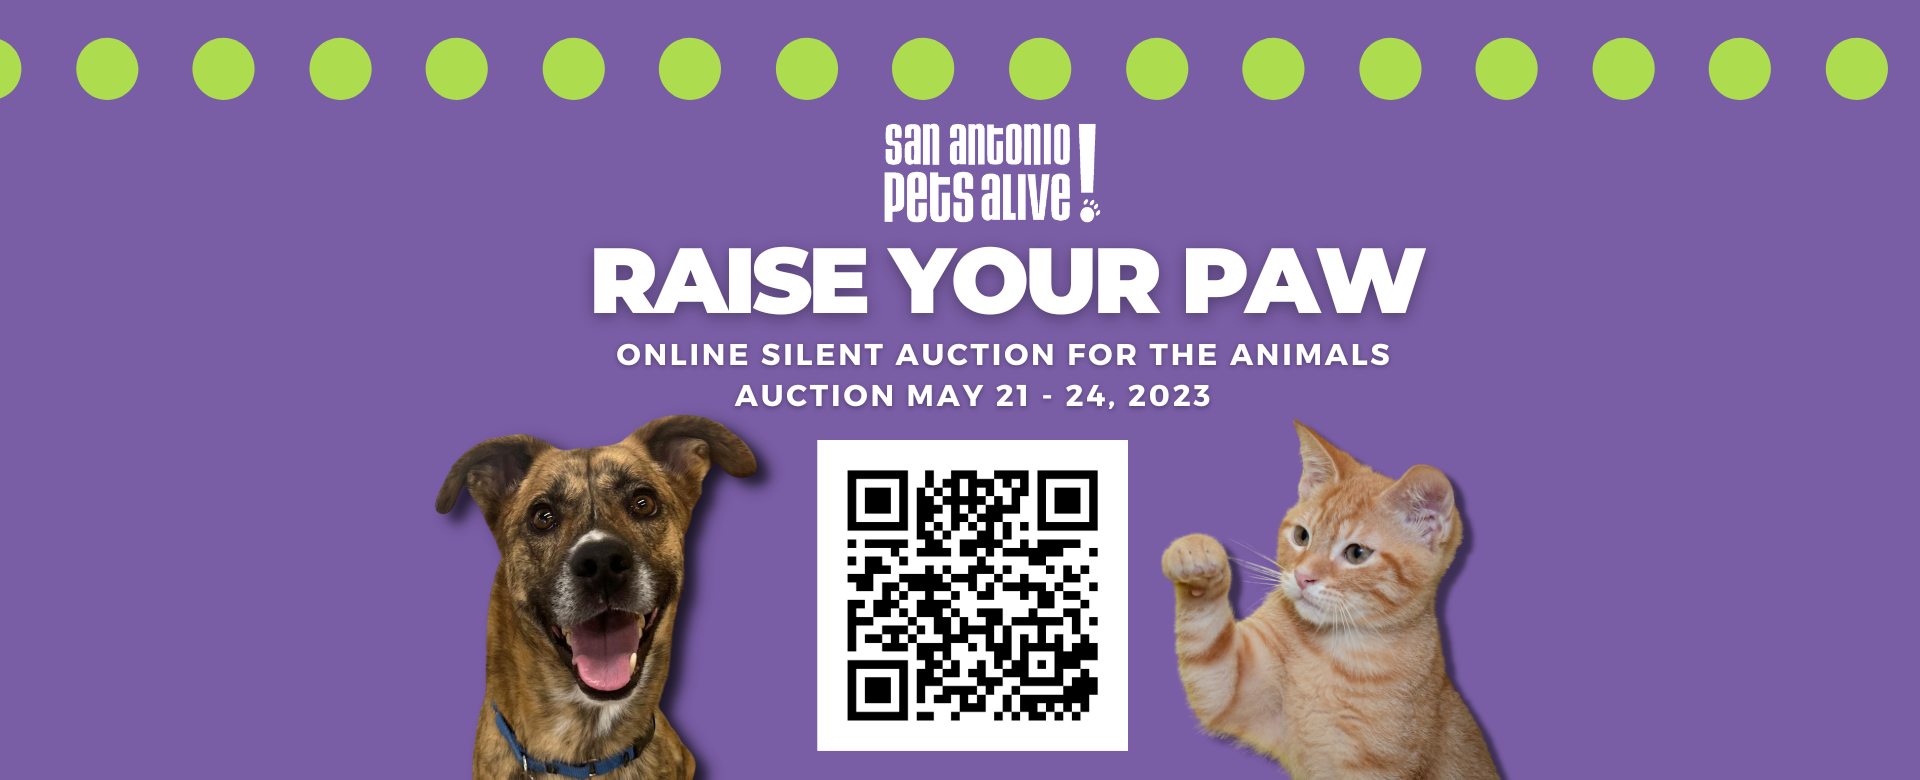 Raise Your Paw 2023 Online Silent Auction for the Animals 